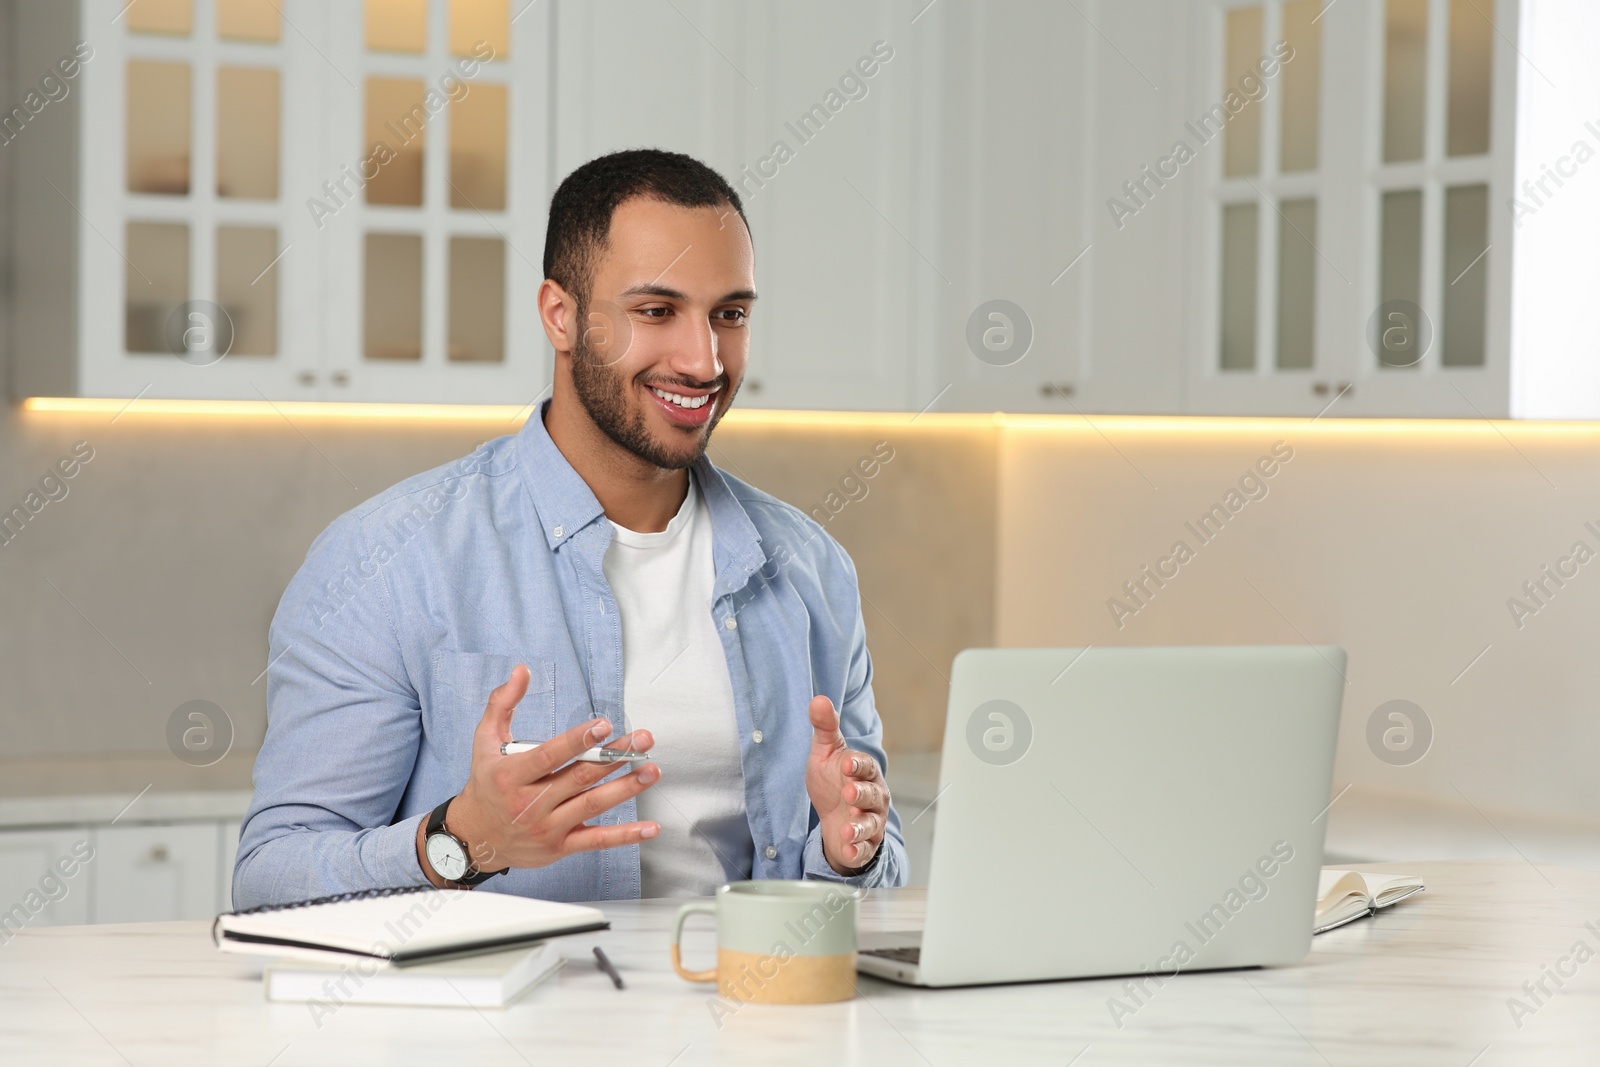 Photo of Young man having online video chat at desk in kitchen. Home office